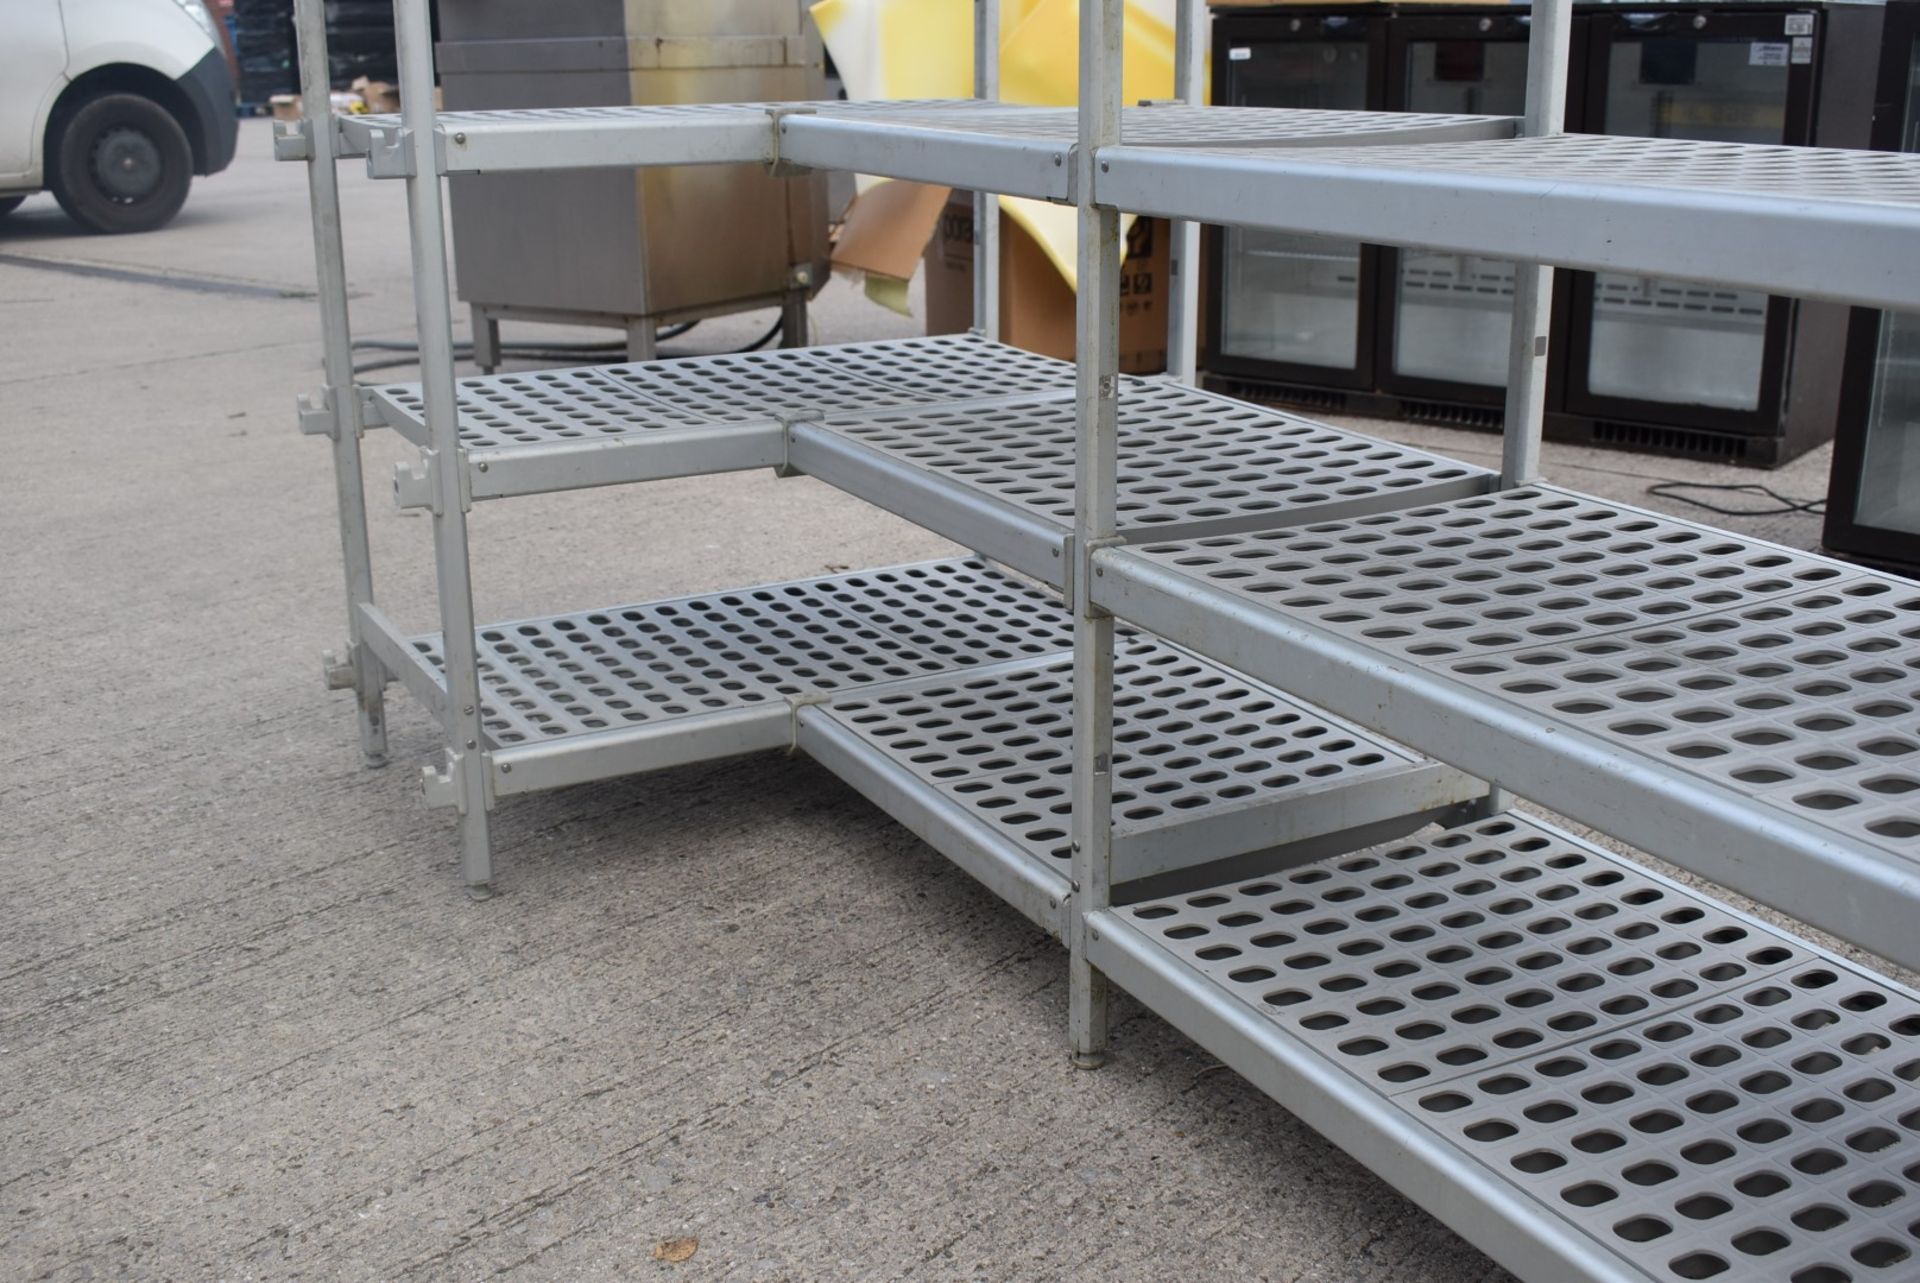 1 x Cold Room L Shaped Shelving Unit With Aluminium Frame and Perforated Shelf Panels - Image 8 of 8